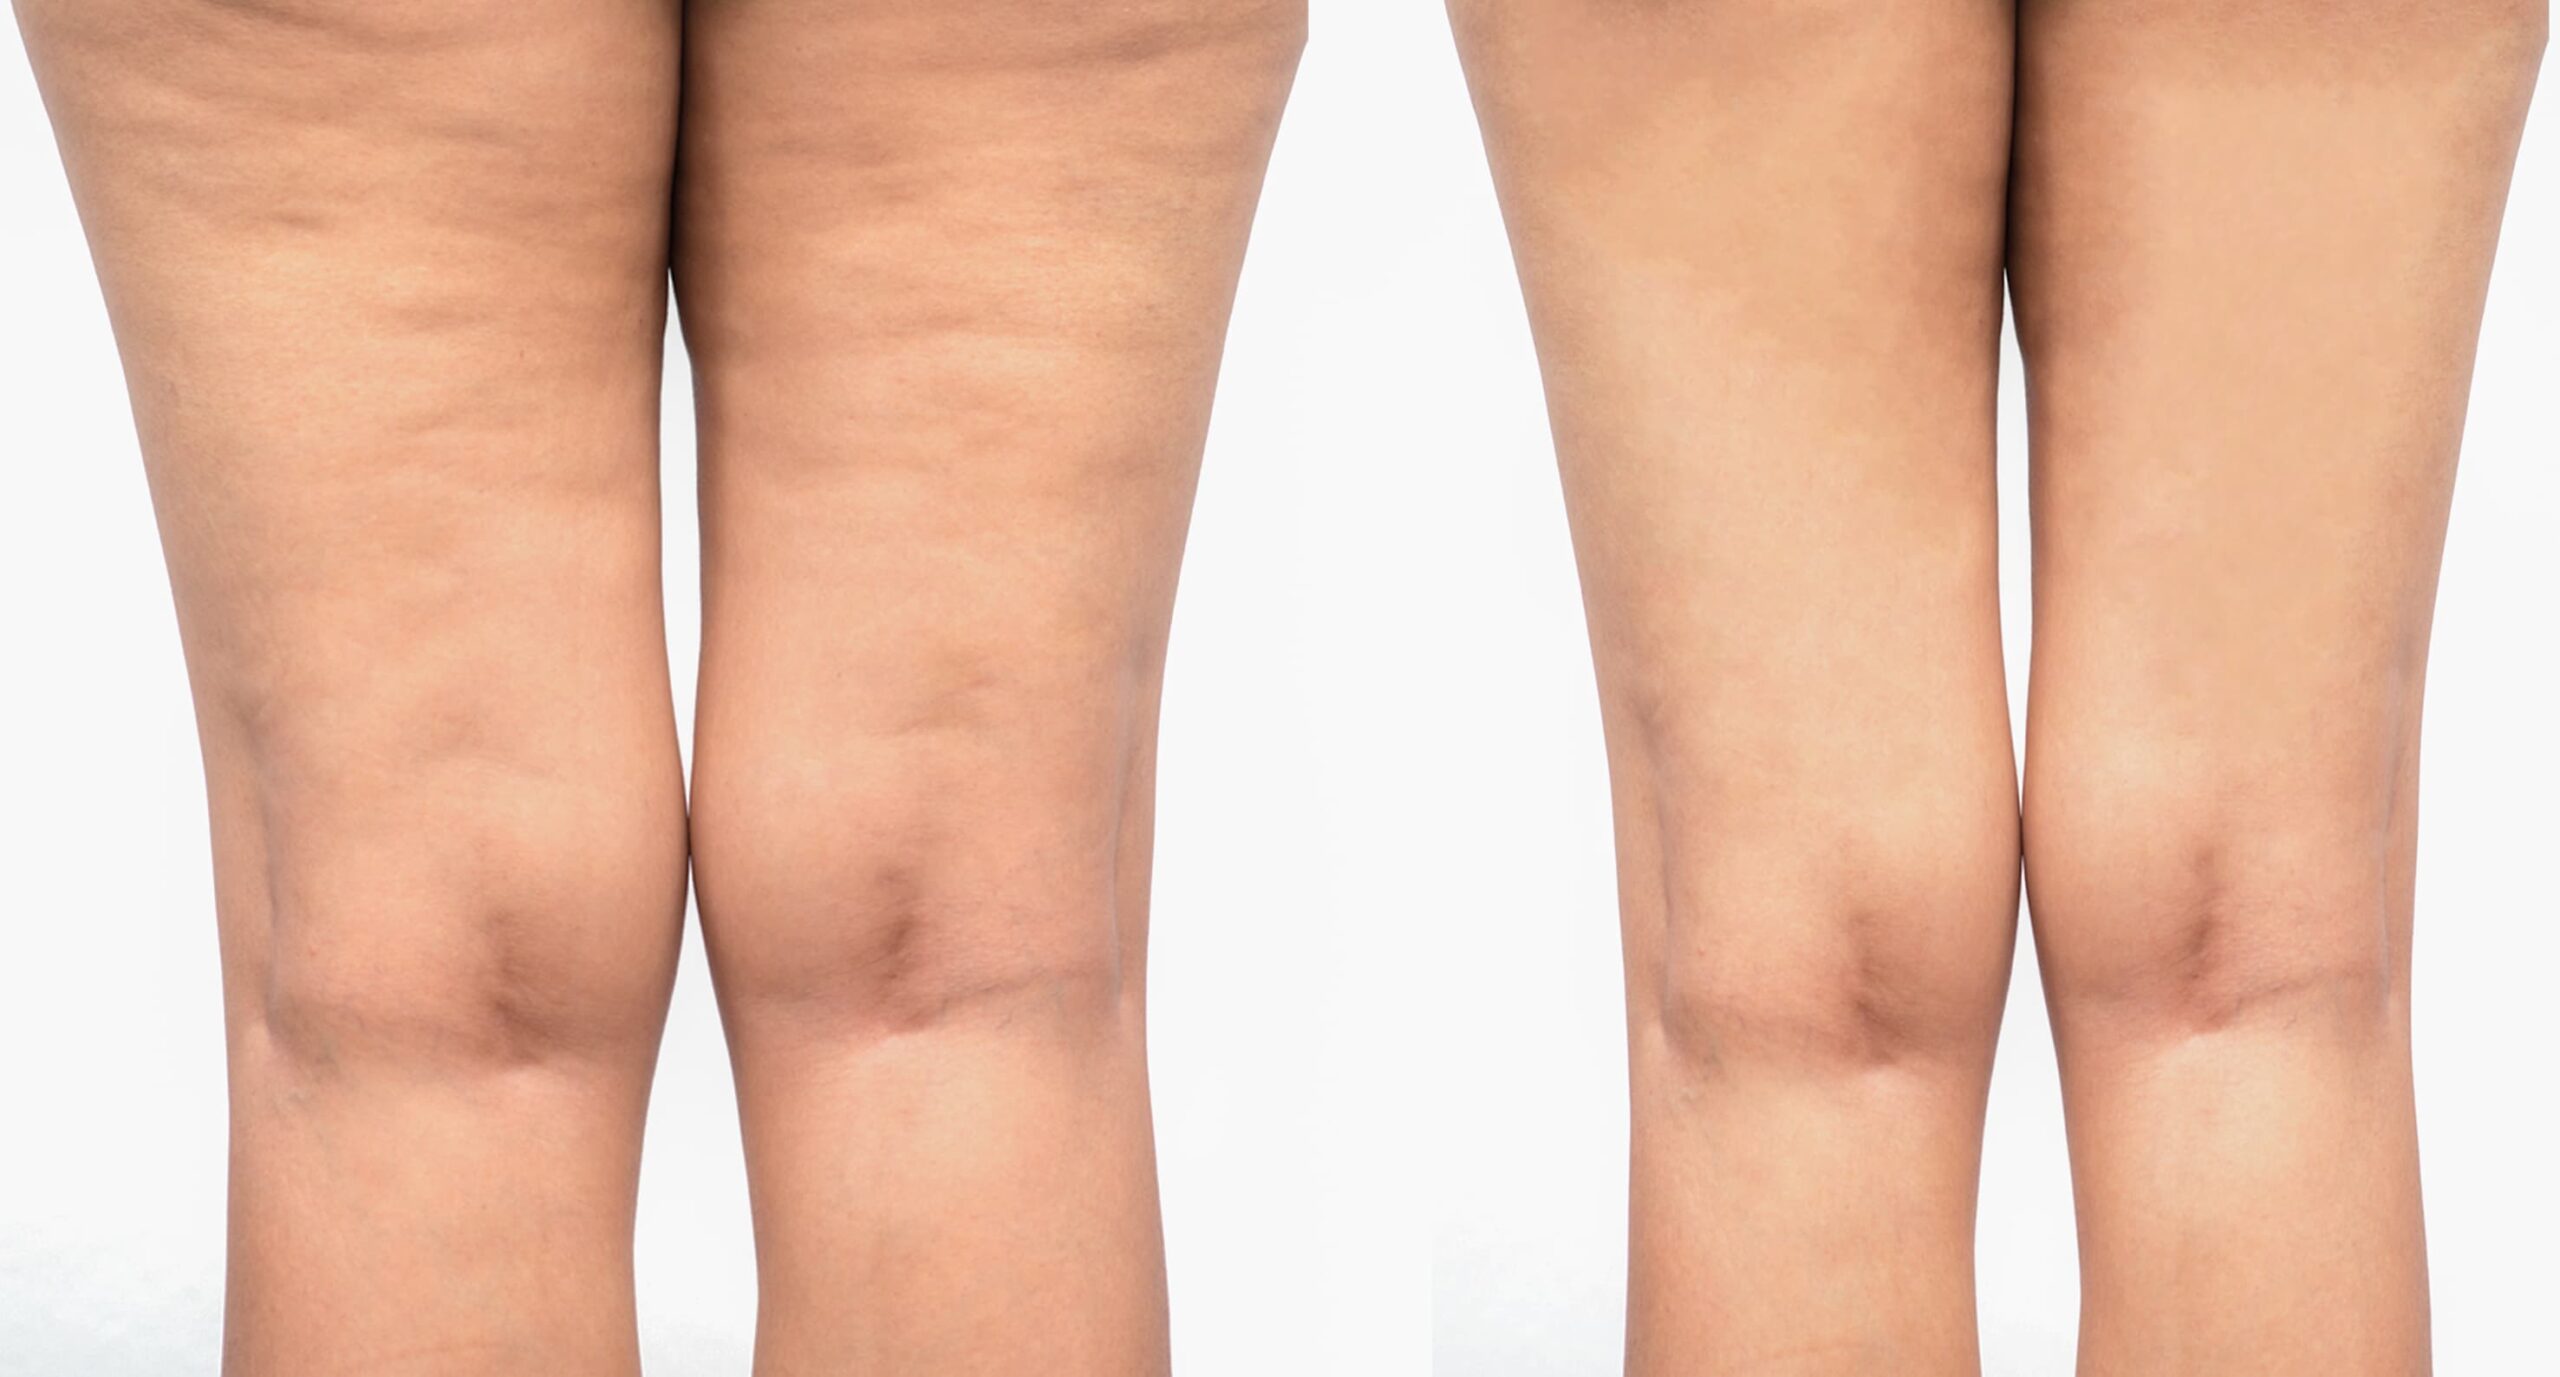 Side to side comparison of the back of a woman's legs.